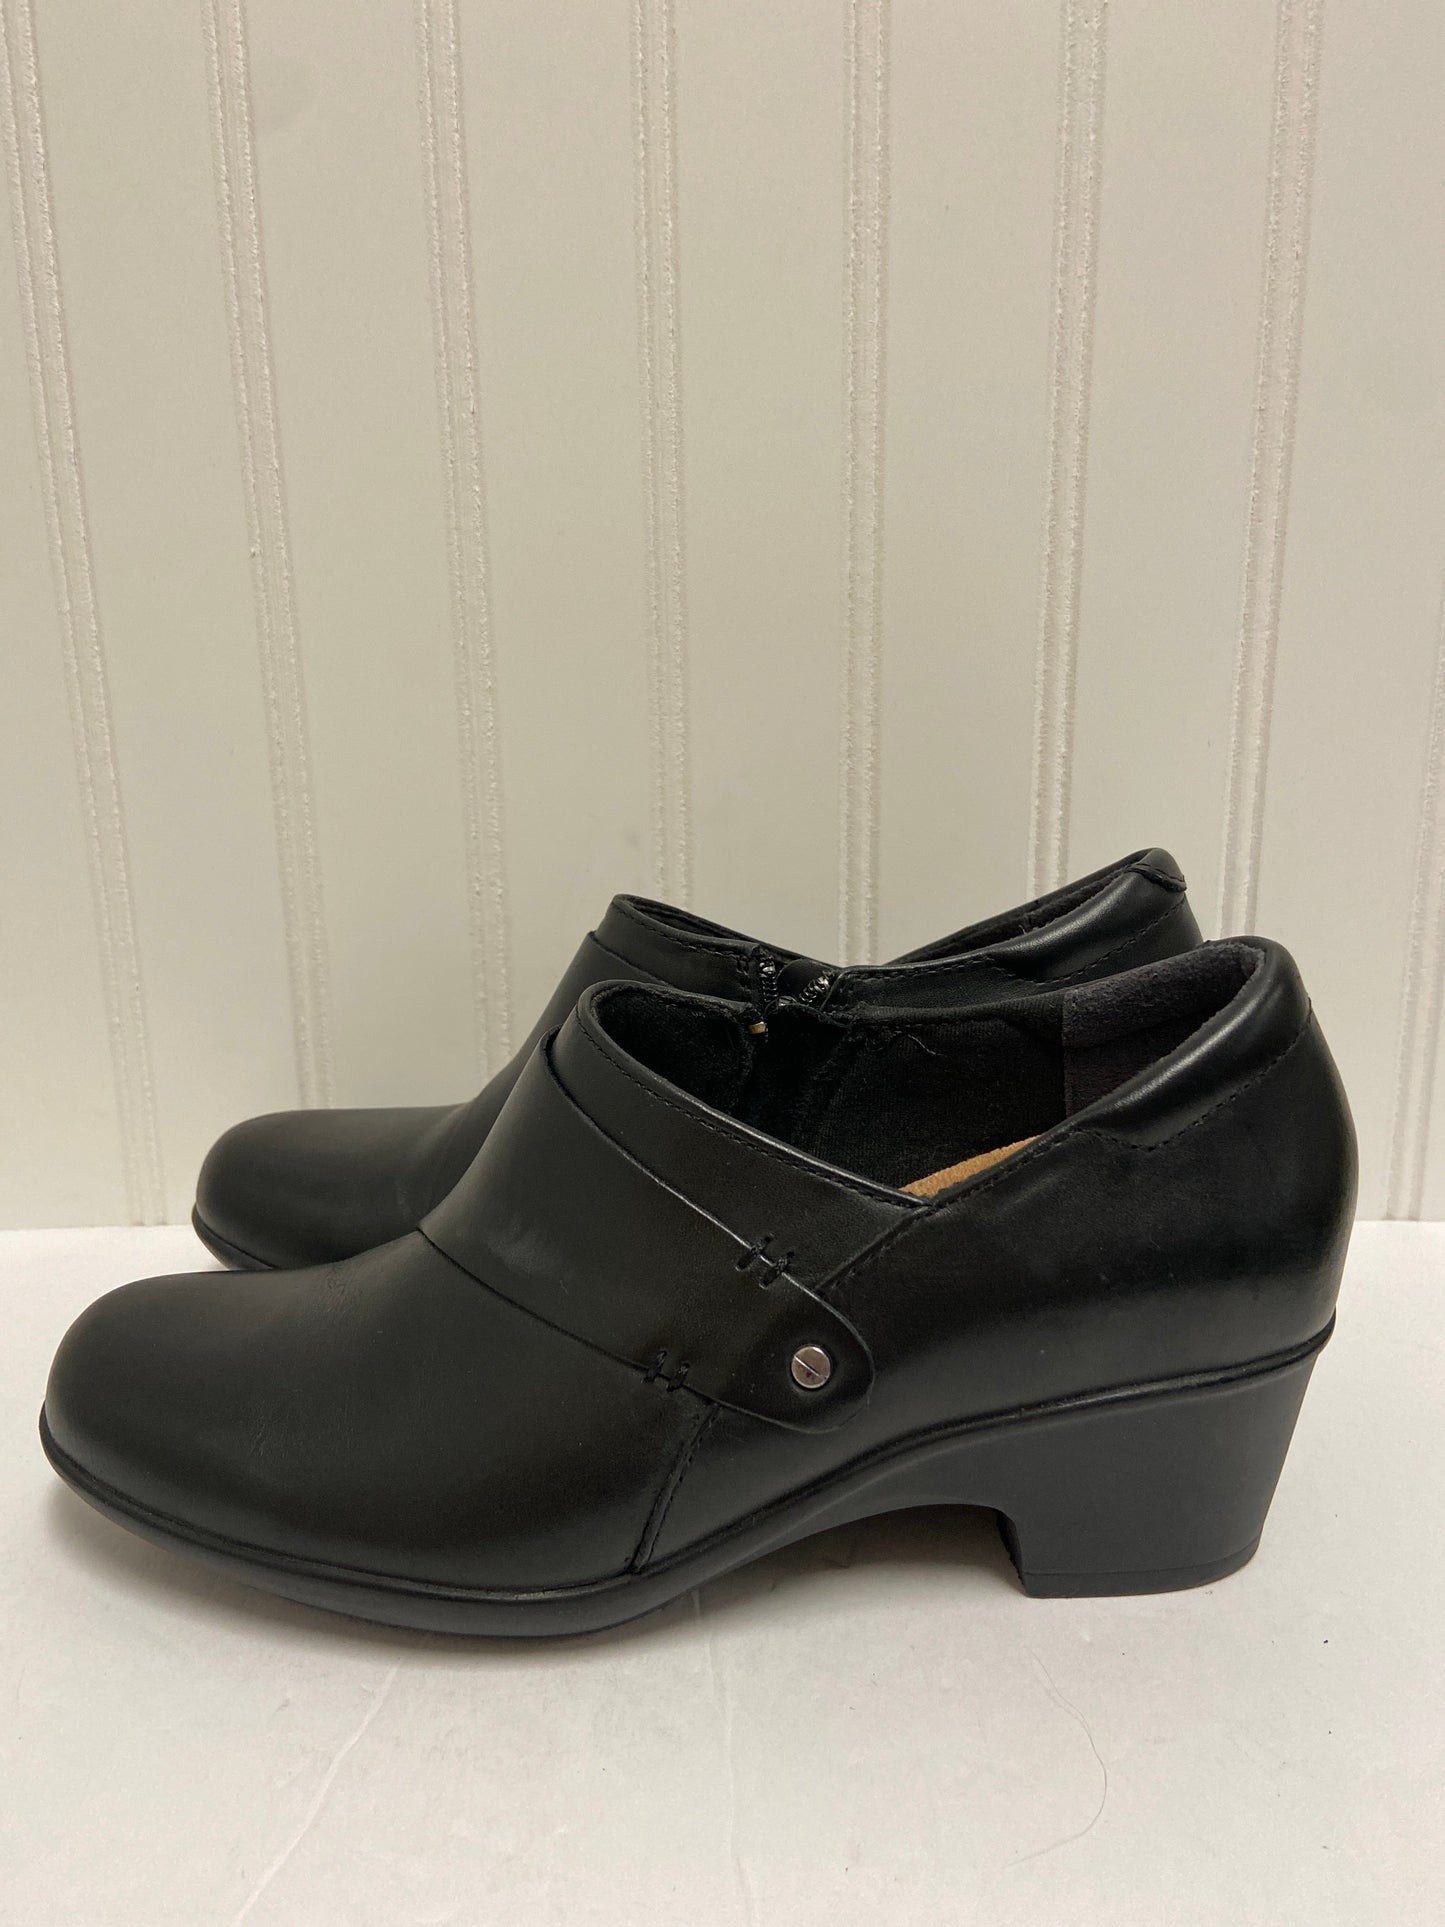 Shoes Heels Block By Clarks  Size: 7